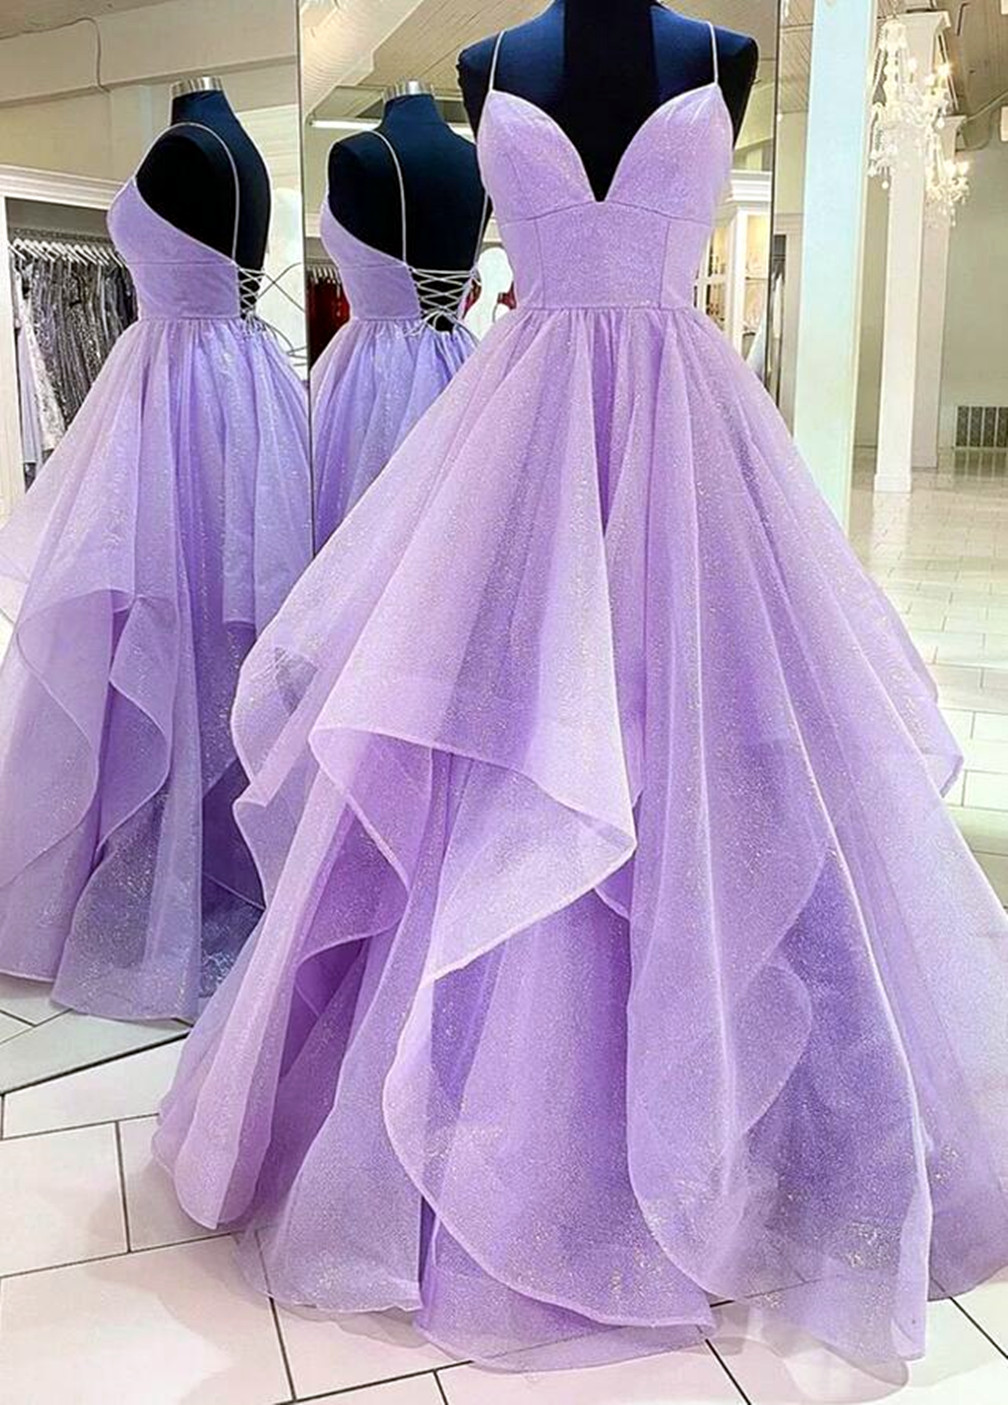 Women Spaghetti Strap Prom Dresses Long Tulle Evening Party Gowns Sleeveless Formal Dress Yp057